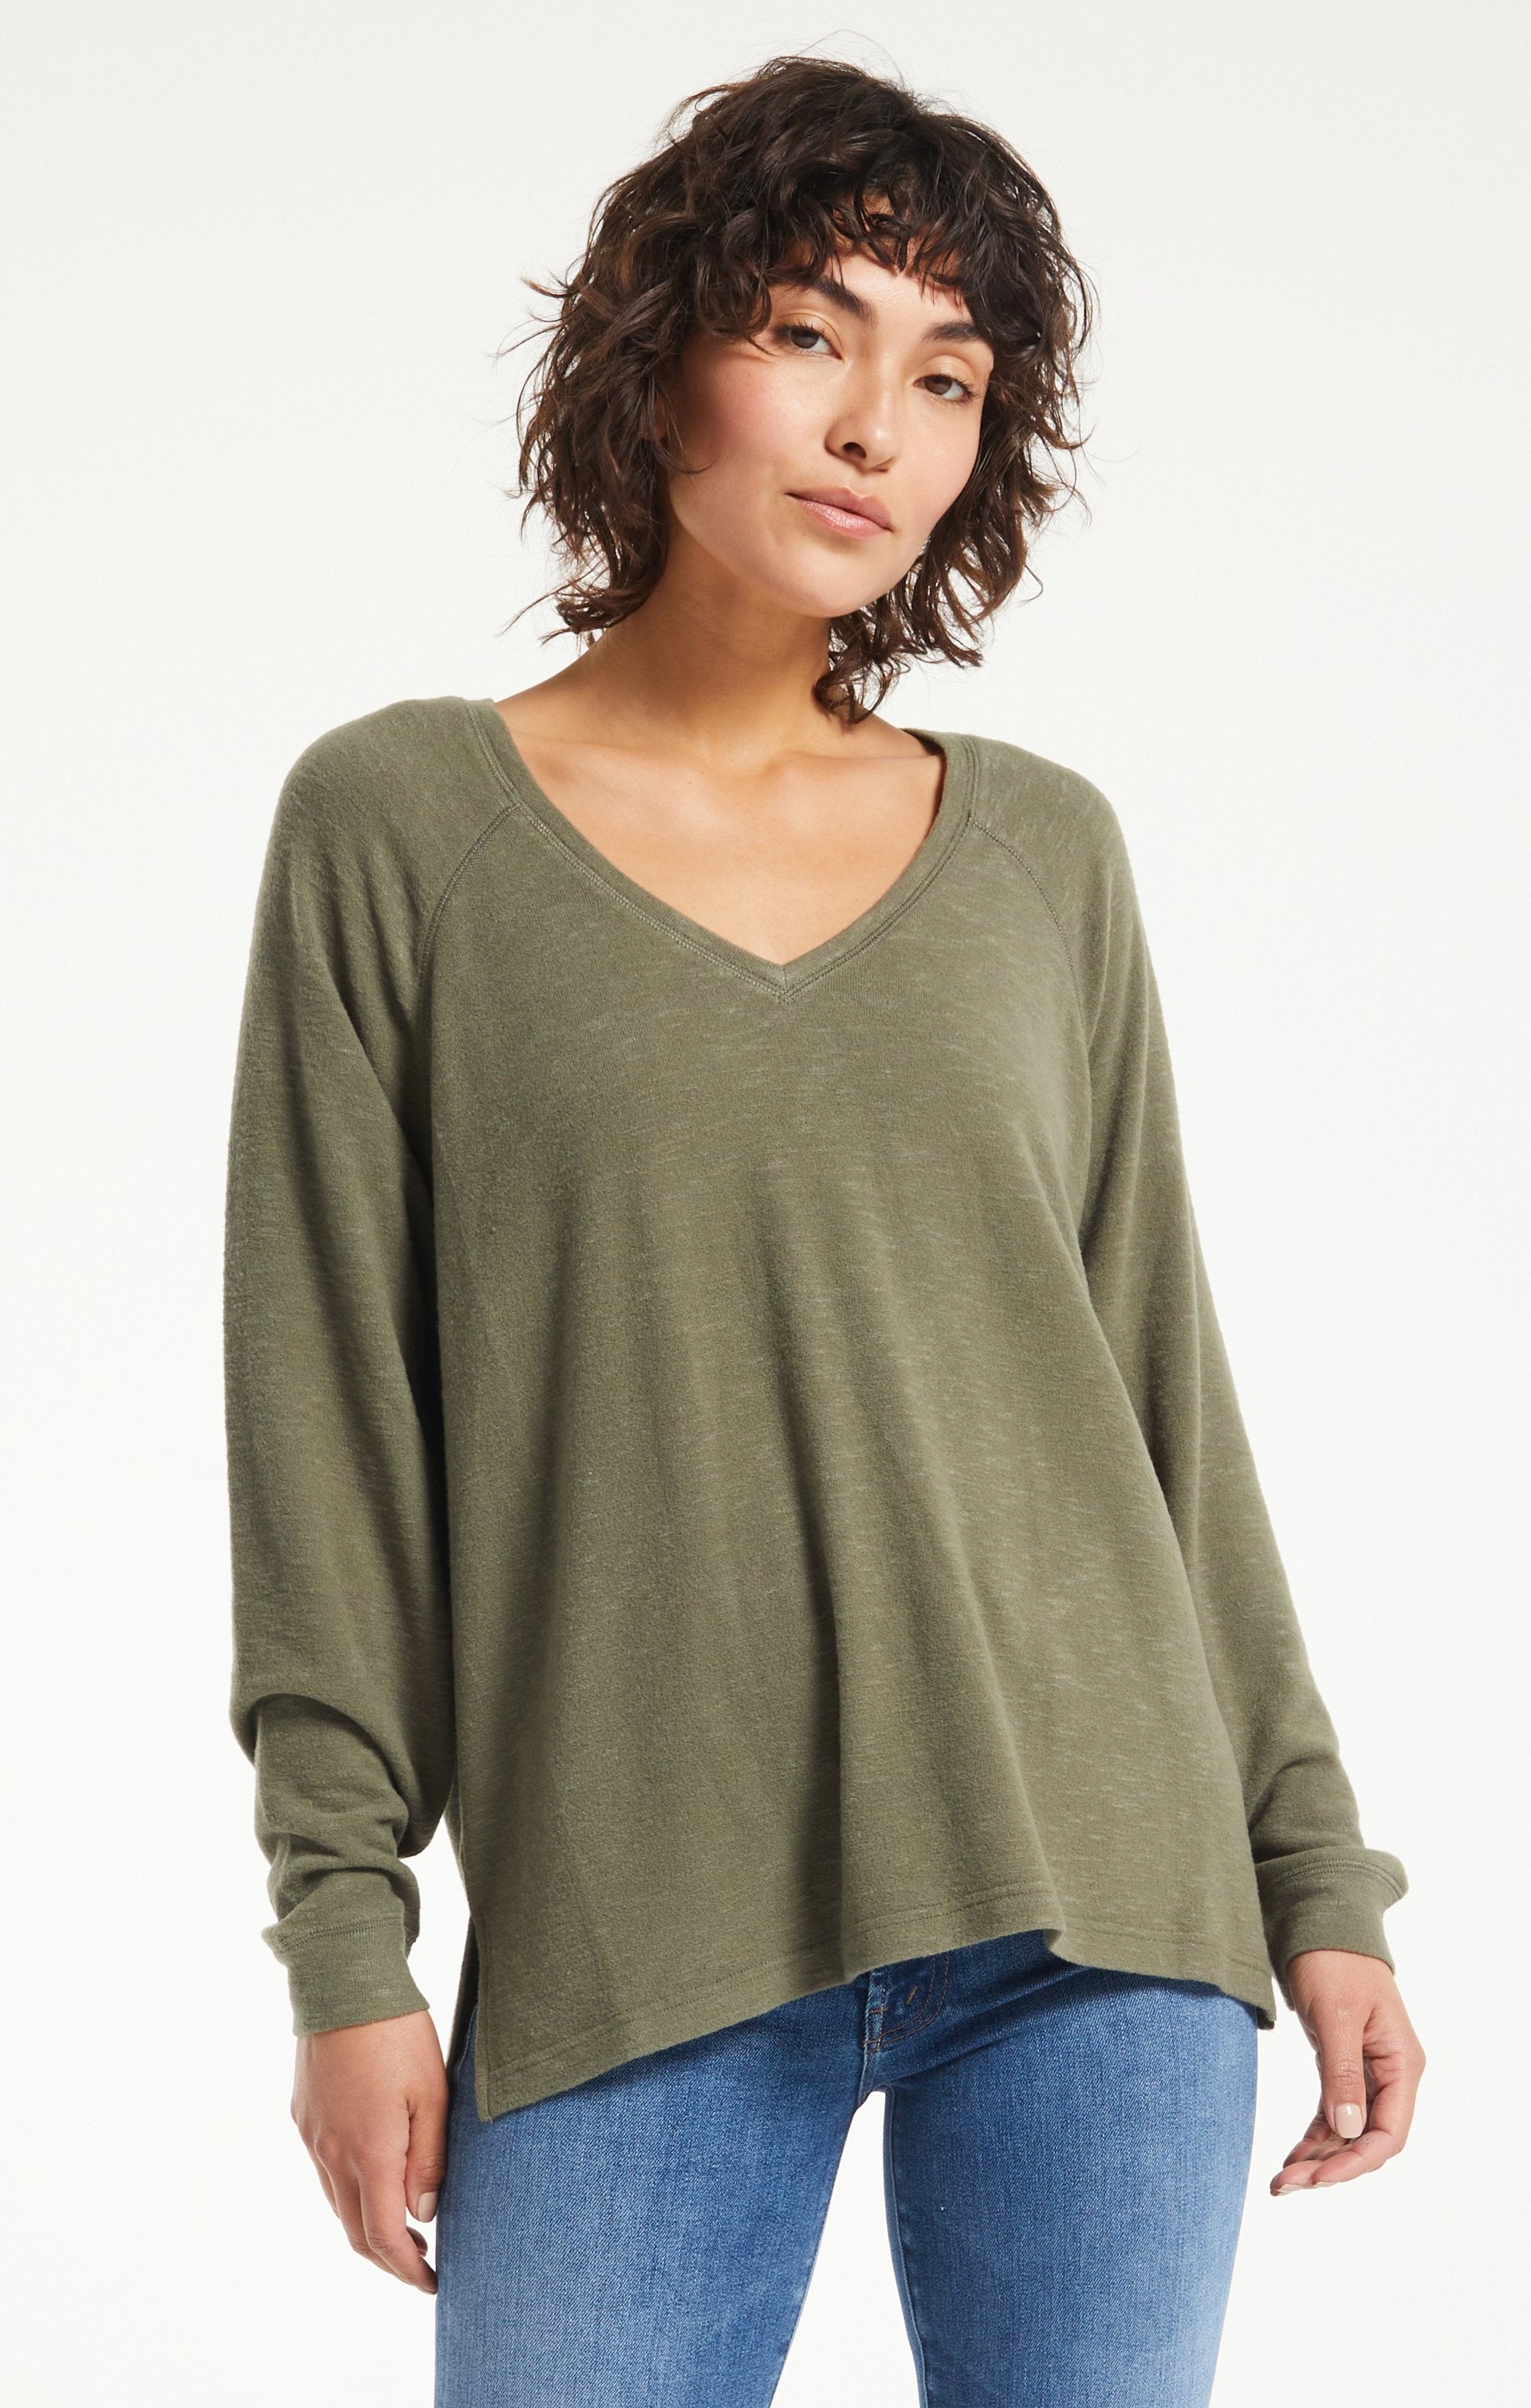 Lyndell Sweater Top